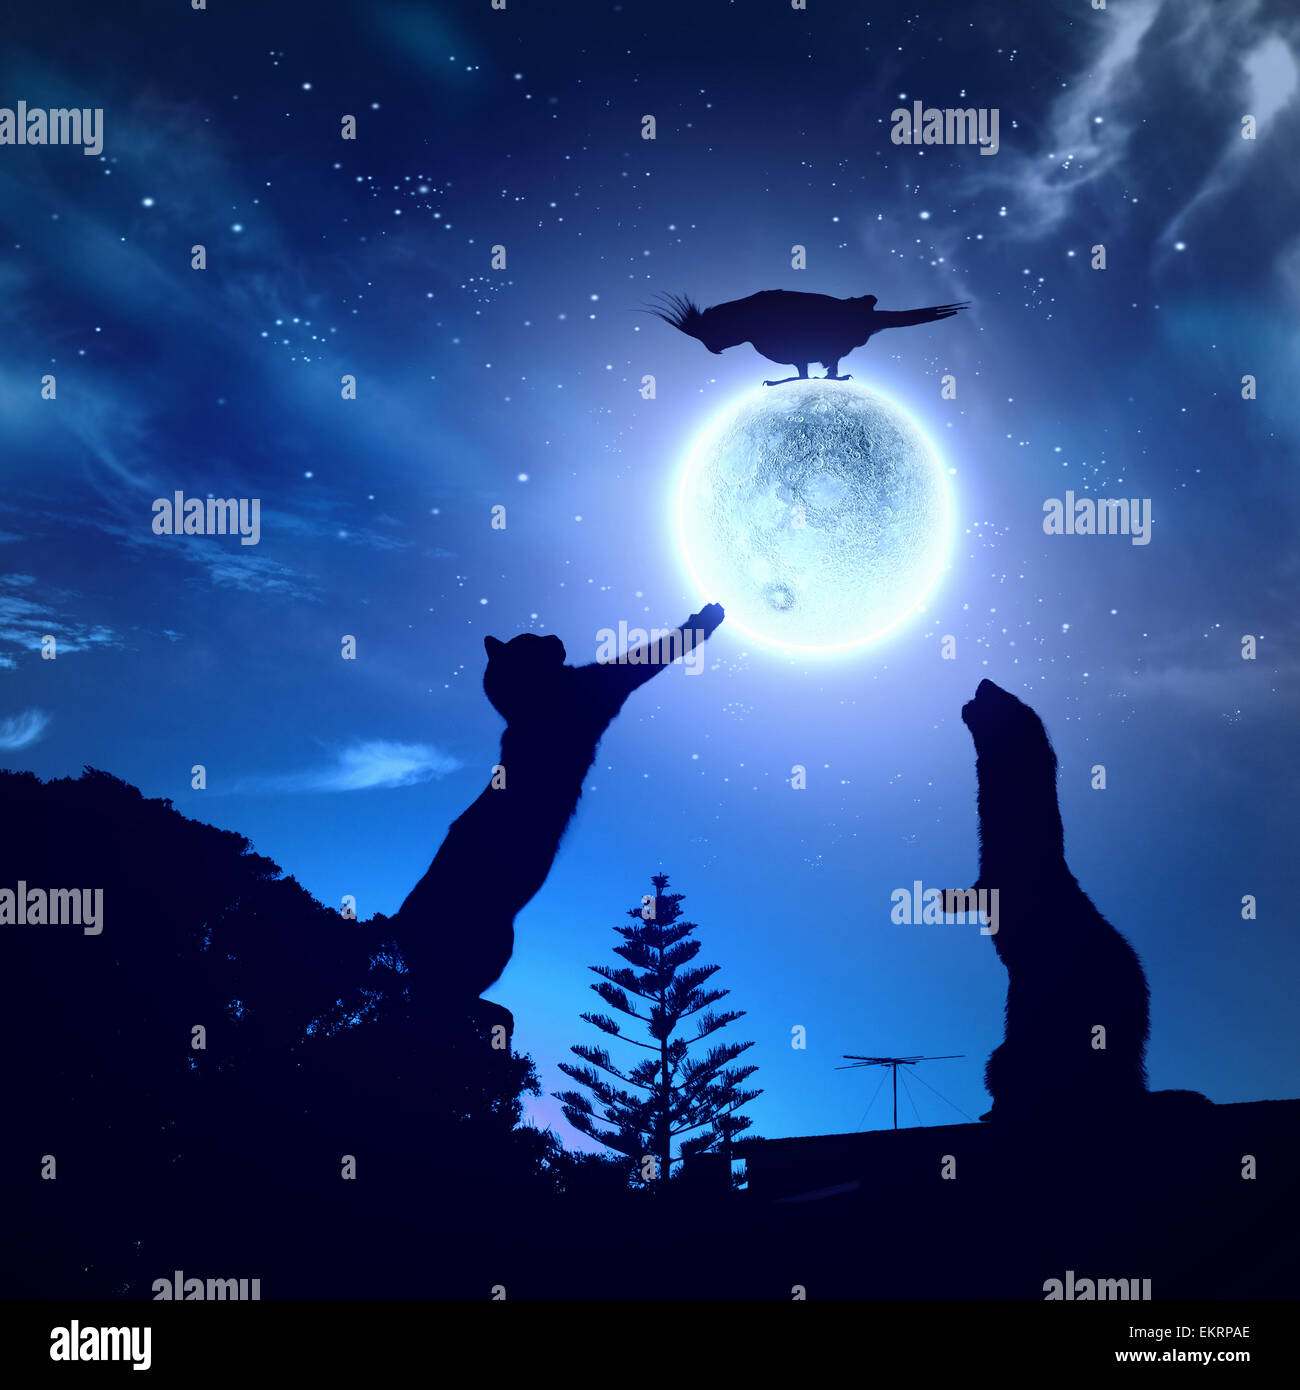 Silhouettes of animals in night sky Stock Photo